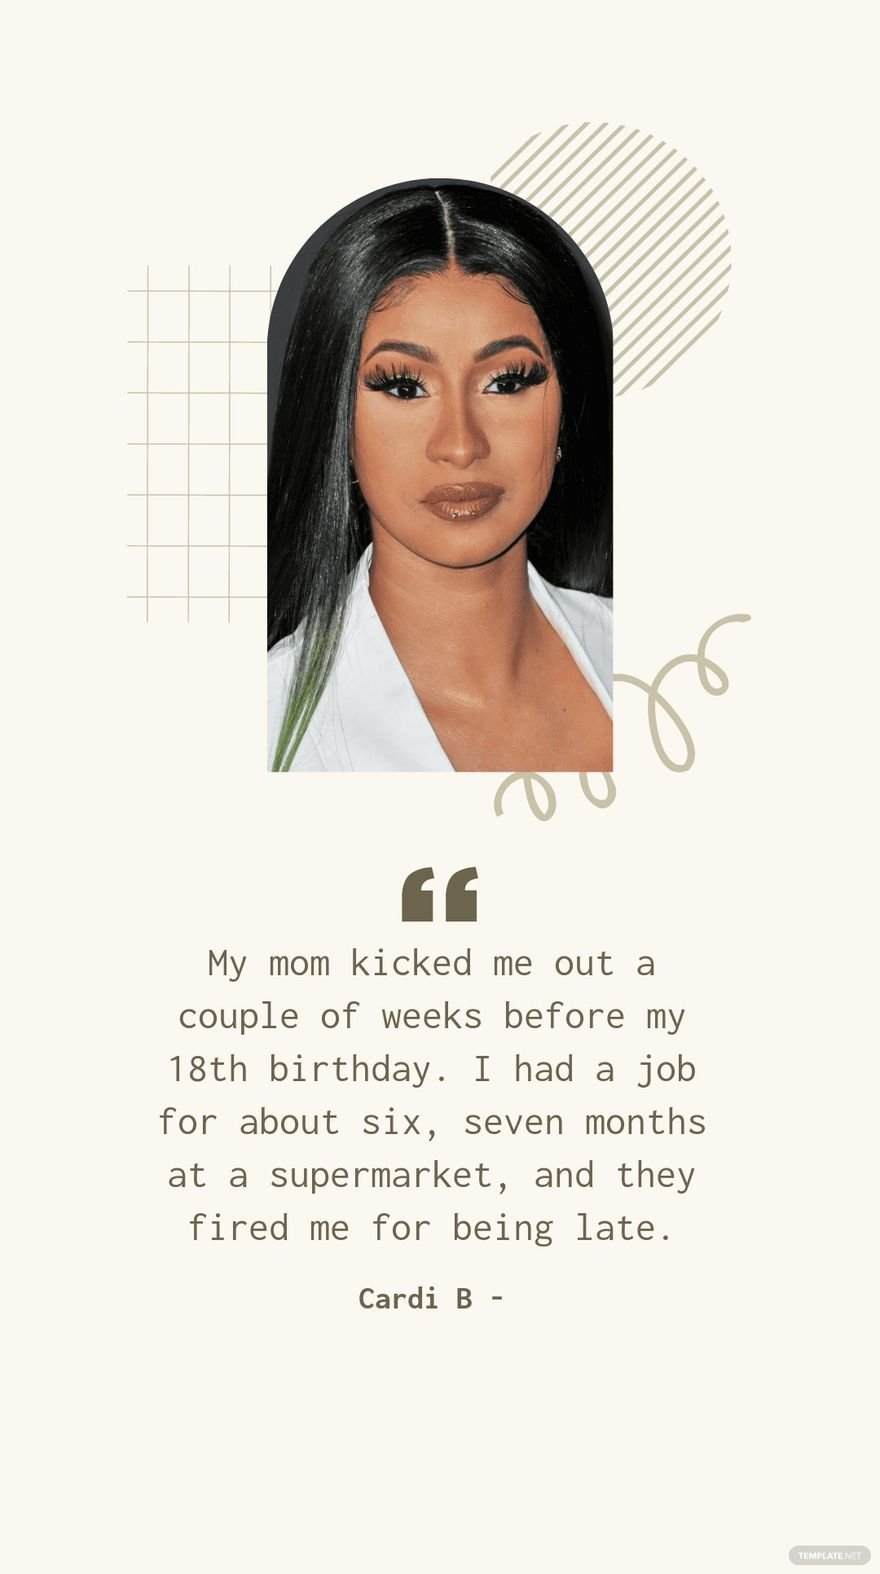 Cardi B - My mom kicked me out a couple of weeks before my 18th birthday. I had a job for about six, seven months at a supermarket, and they fired me for being late.